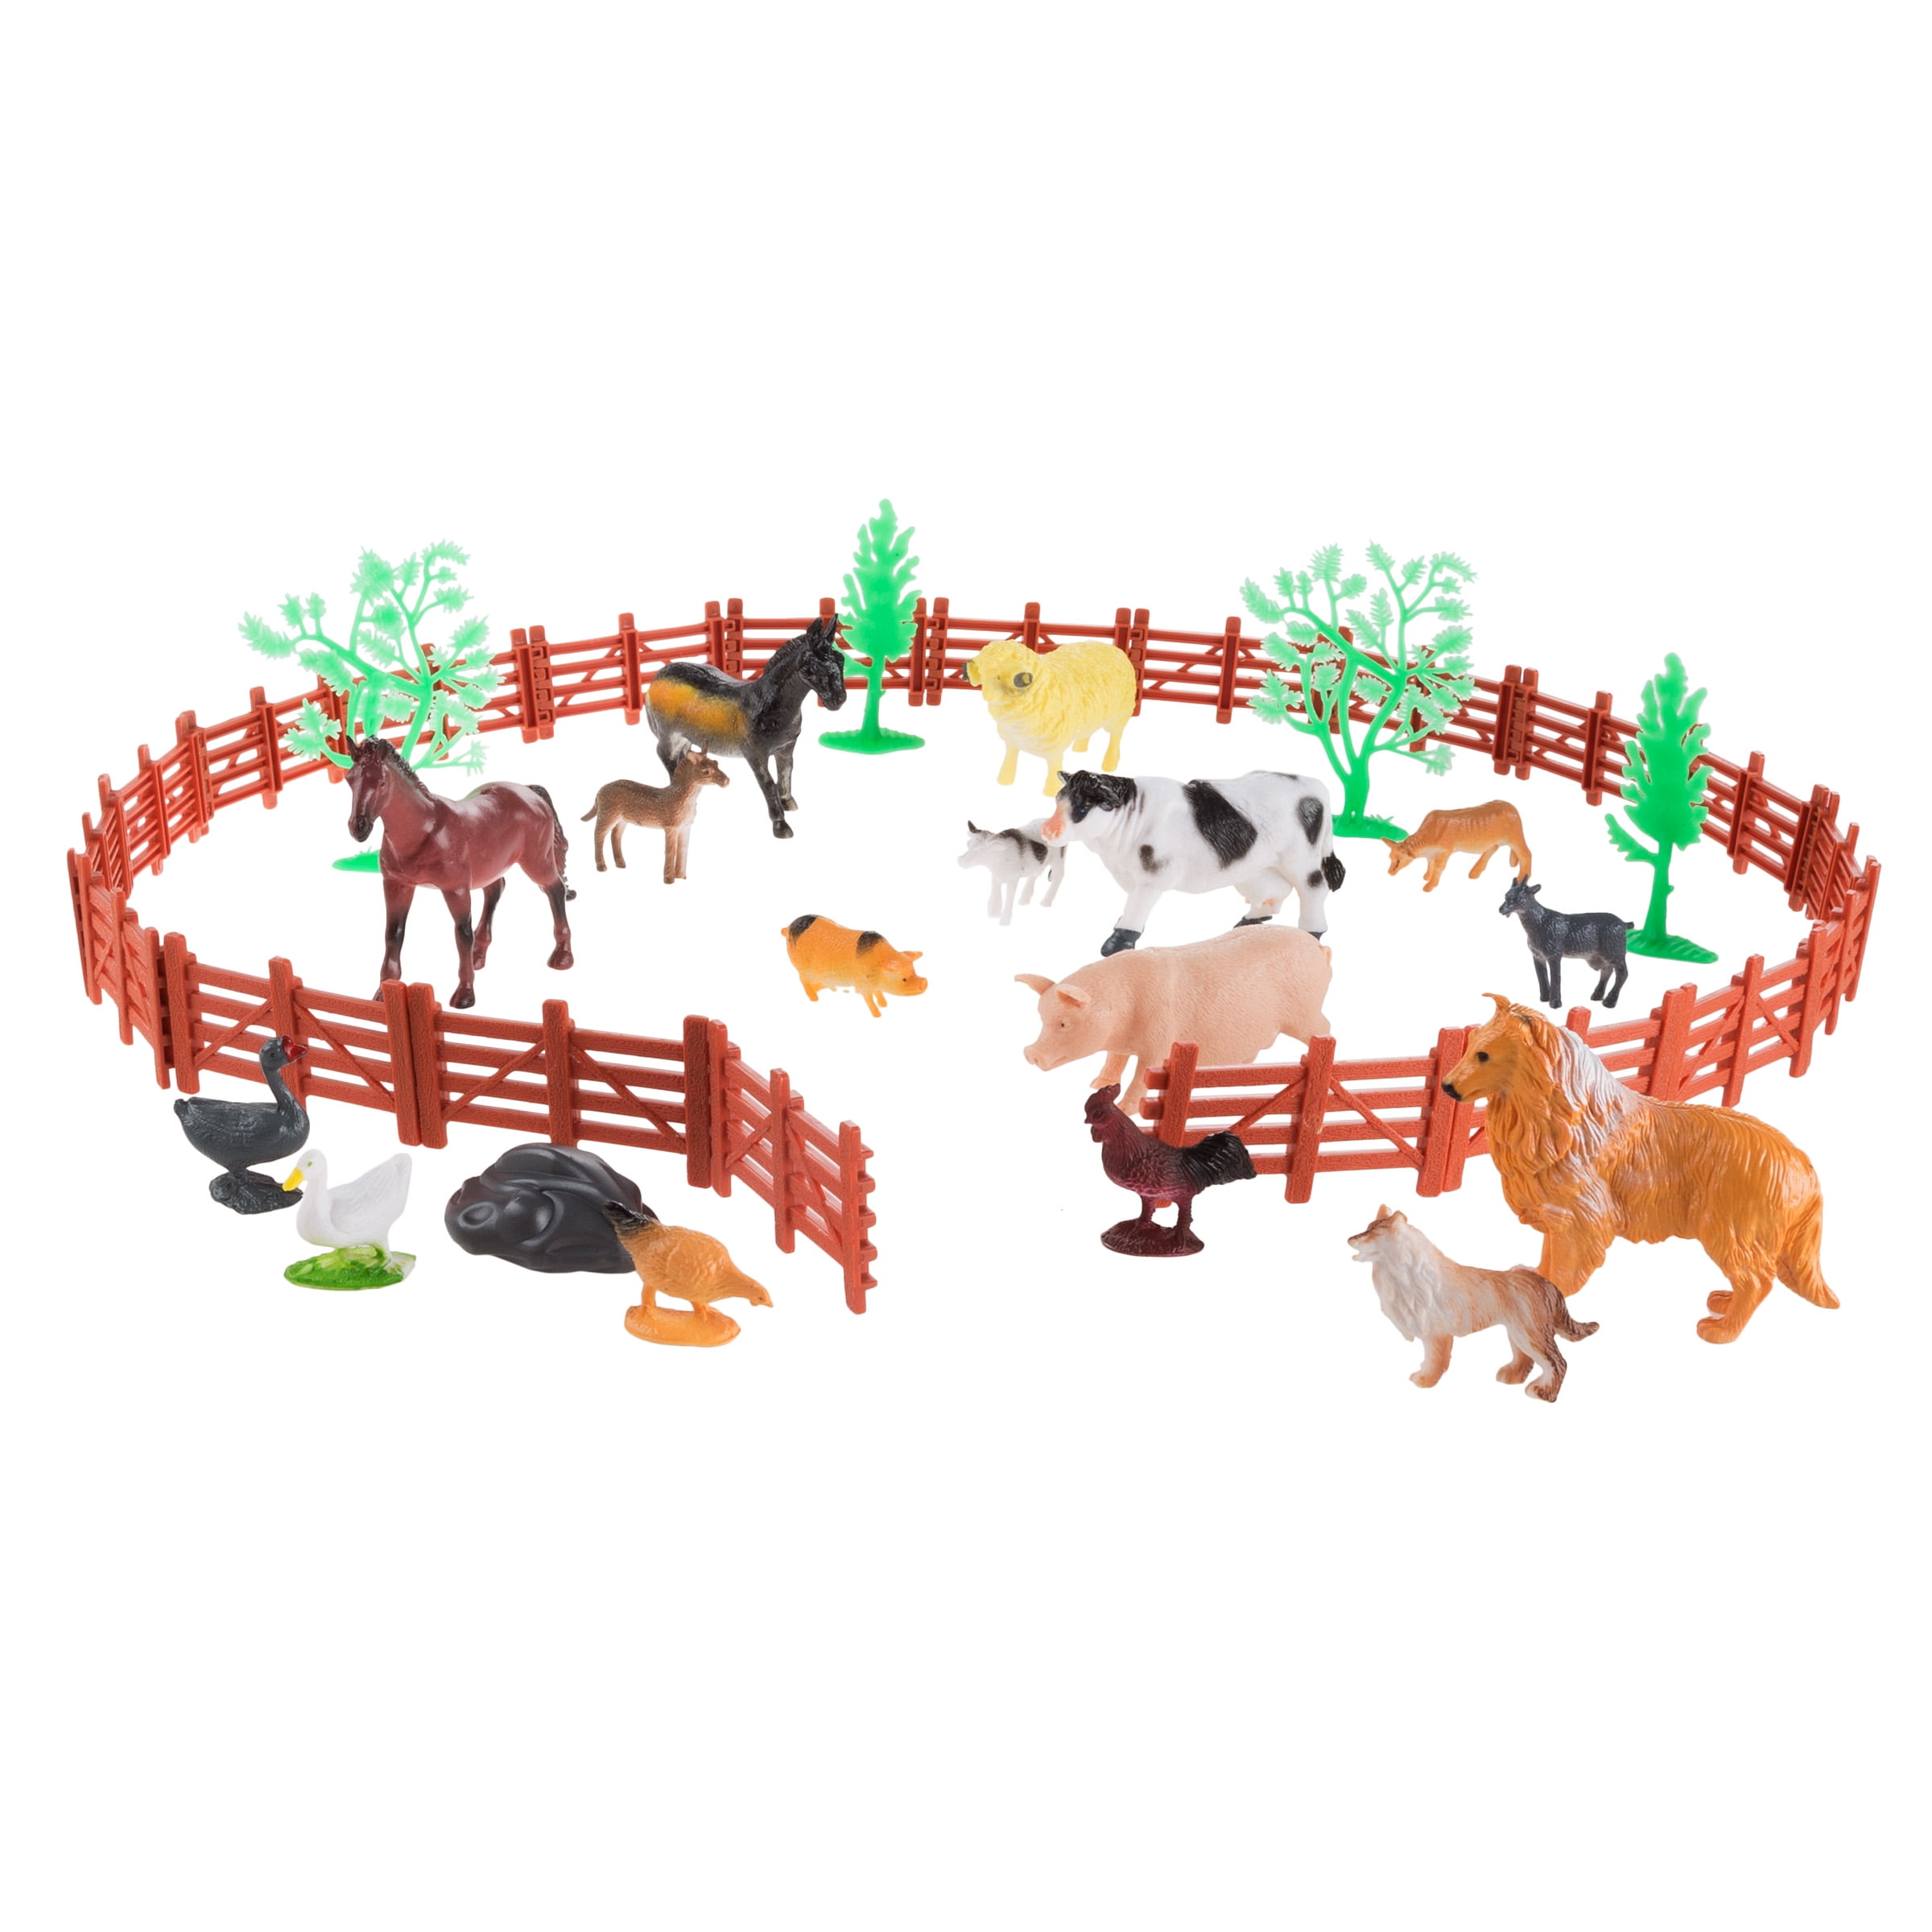 Toy Farm Animal Figures and Barnyard Accessories Set- Includes Fence,  Horses, Cows, Pigs, Chickens and More Animals for Pretend Play by Hey! Play  